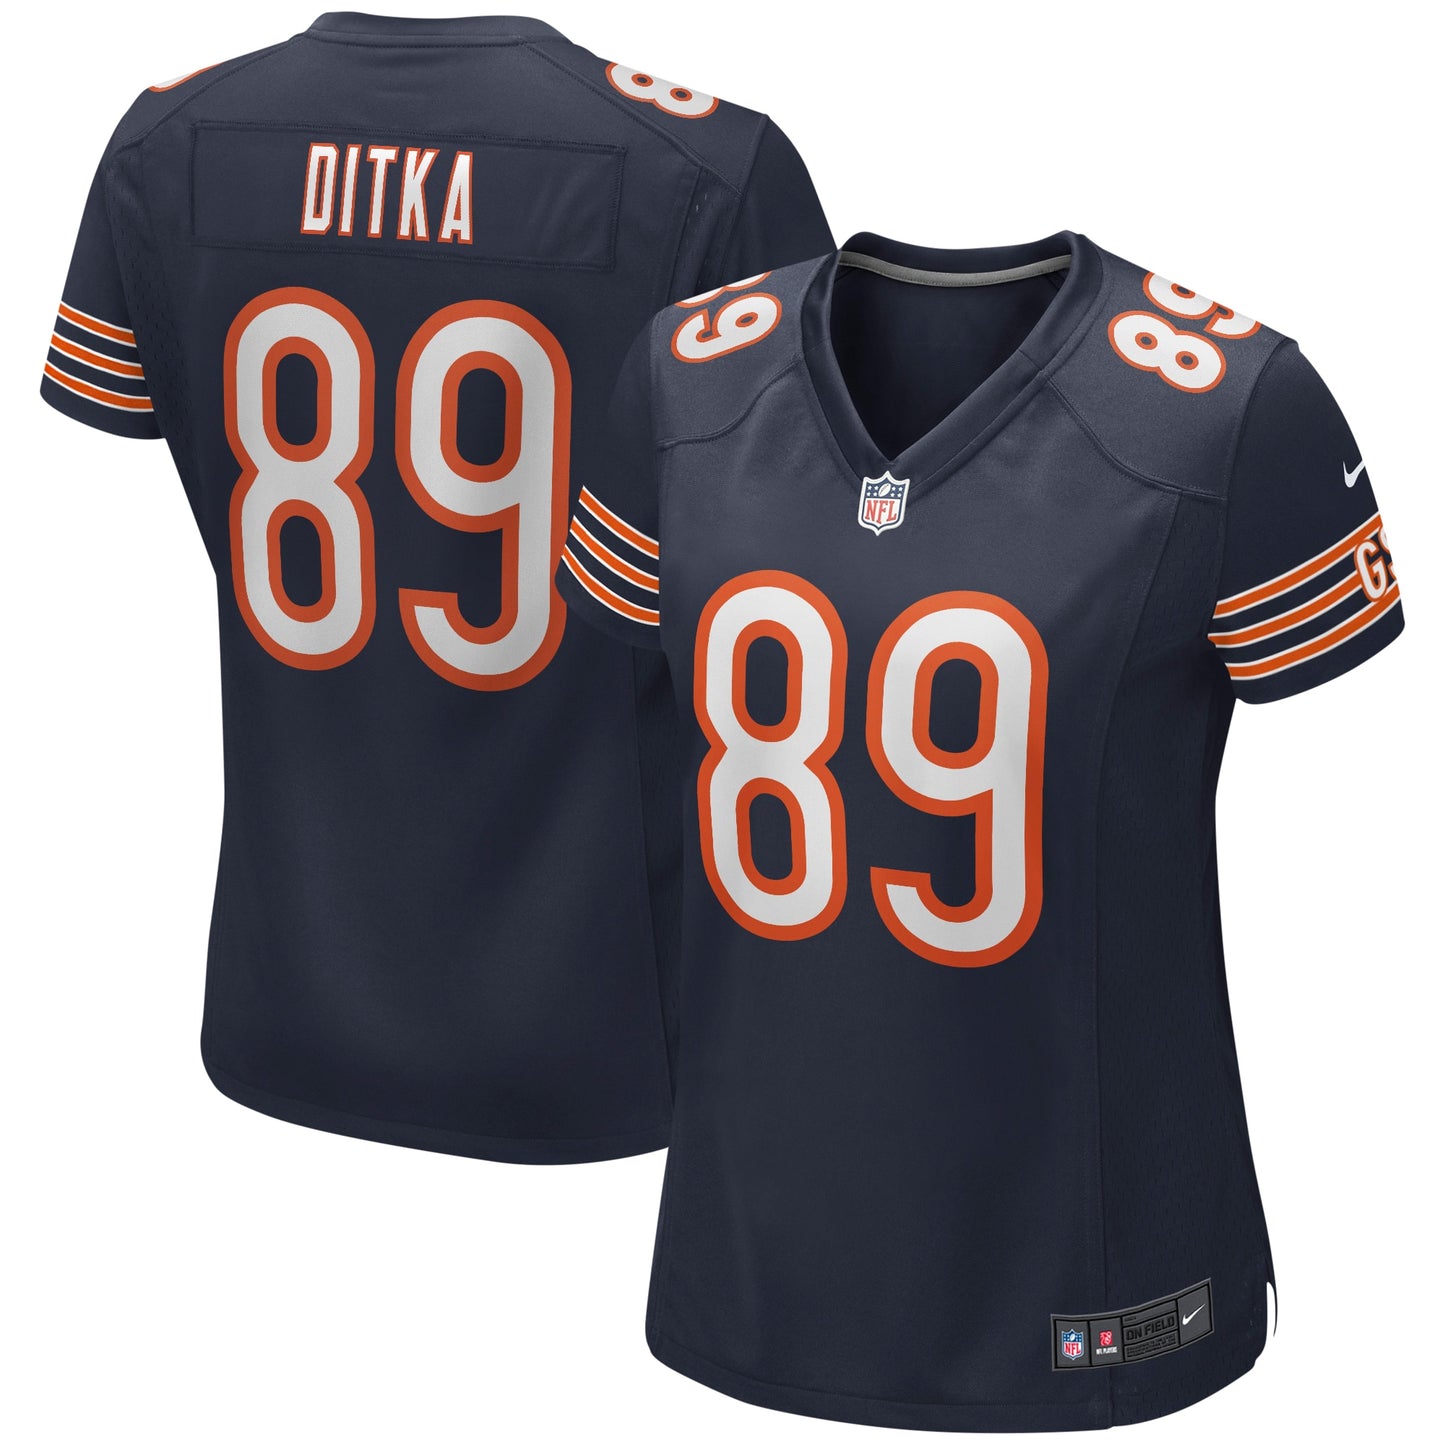 Mike Ditka Chicago Bears Nike Women's Game Retired Player Jersey - Navy